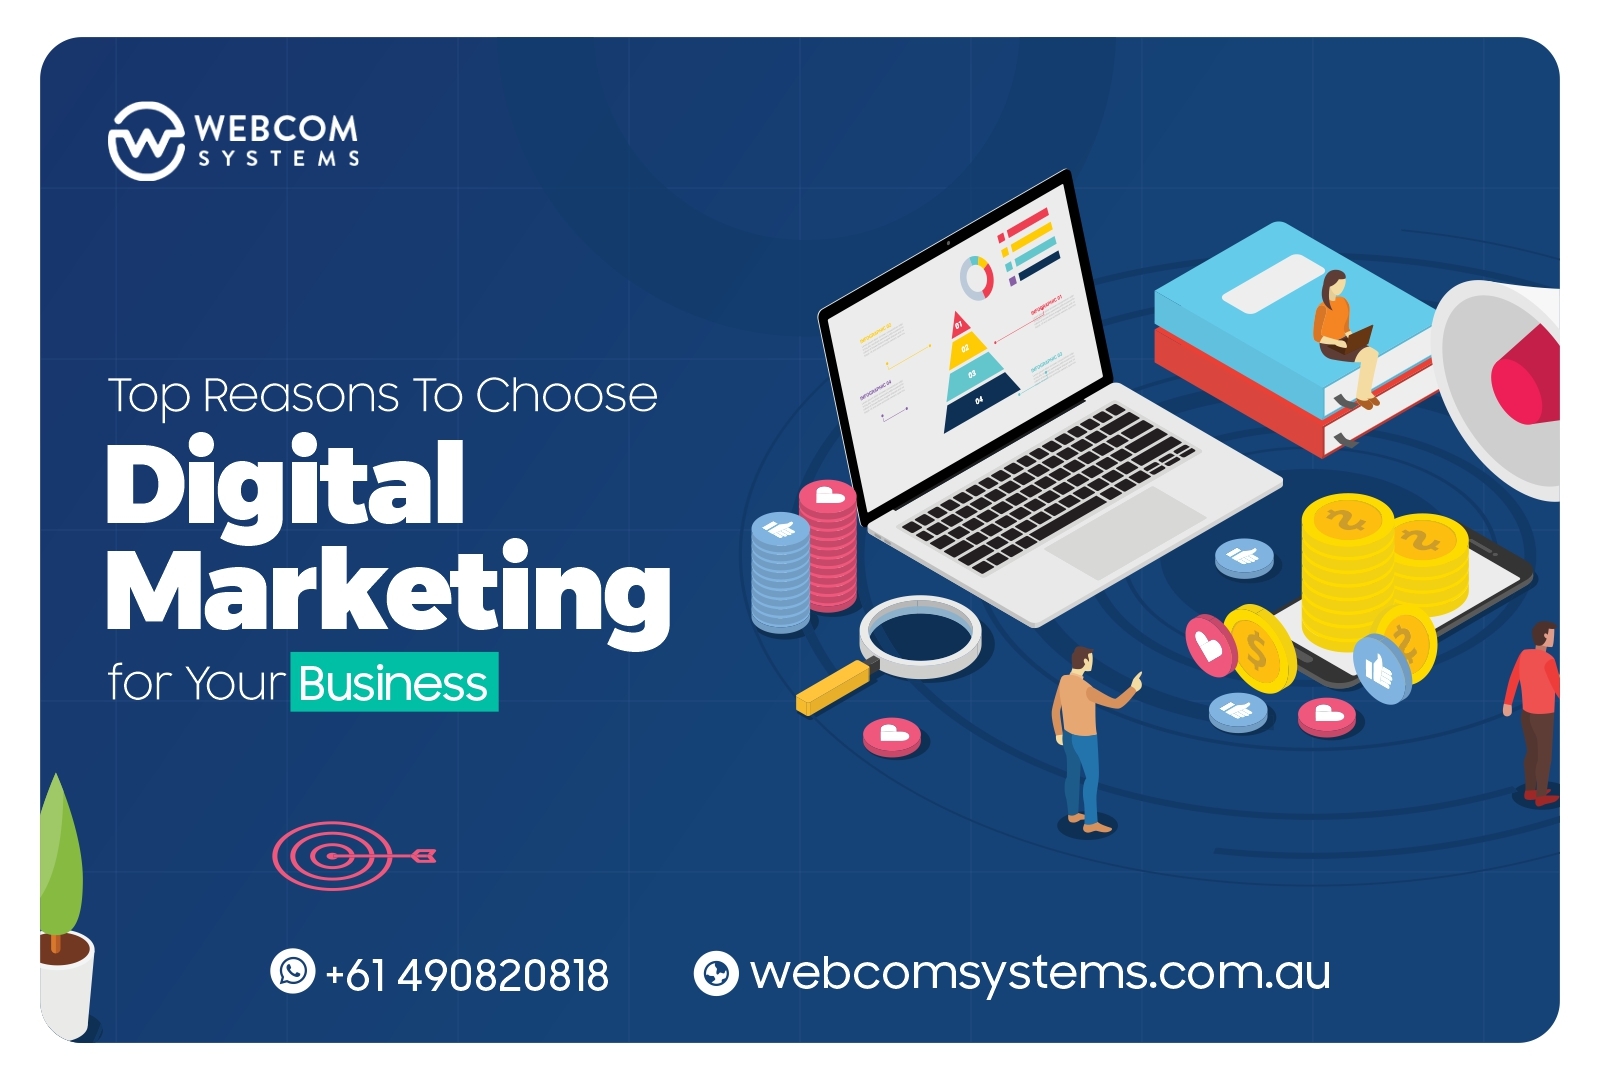 The Top Reasons To Choose Digital Marketing for Your Business!